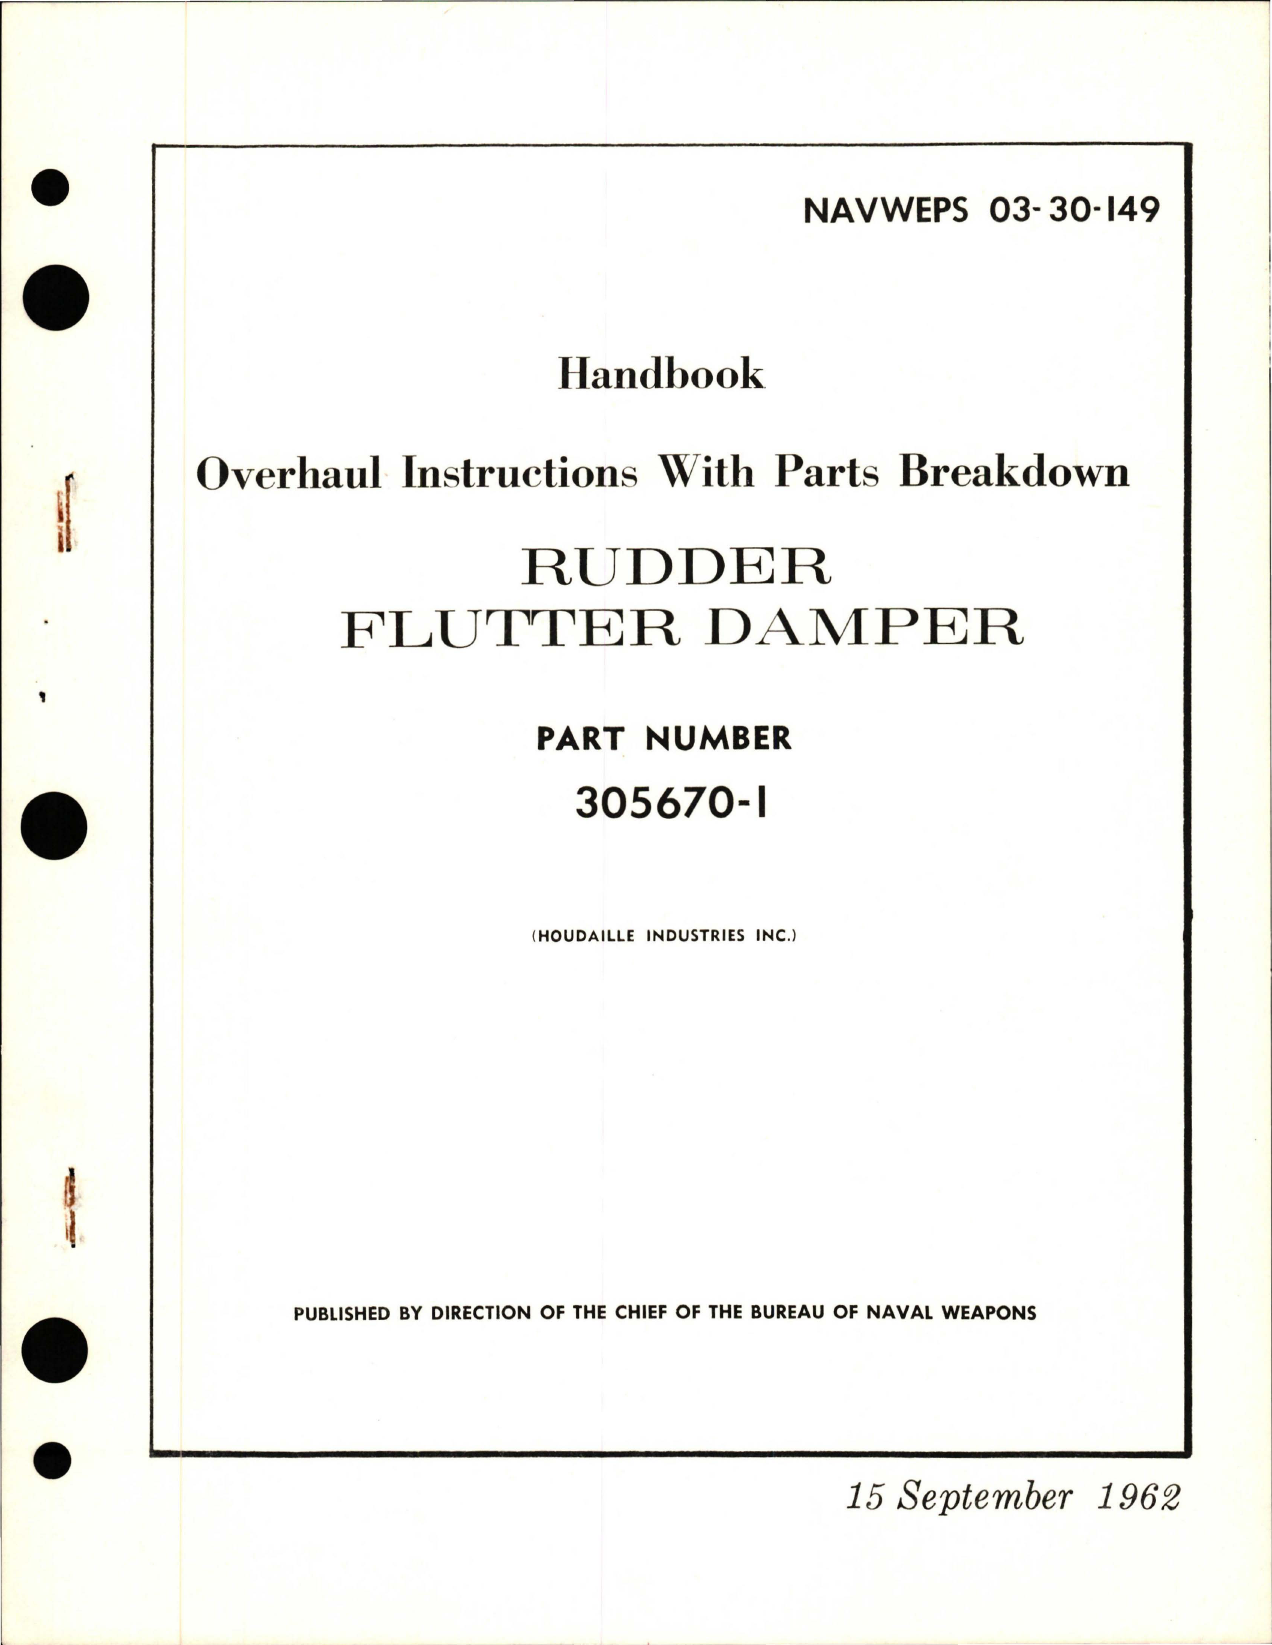 Sample page 1 from AirCorps Library document: Overhaul Instructions with Parts Breakdown for Rudder Flutter Damper - Part 305670-1